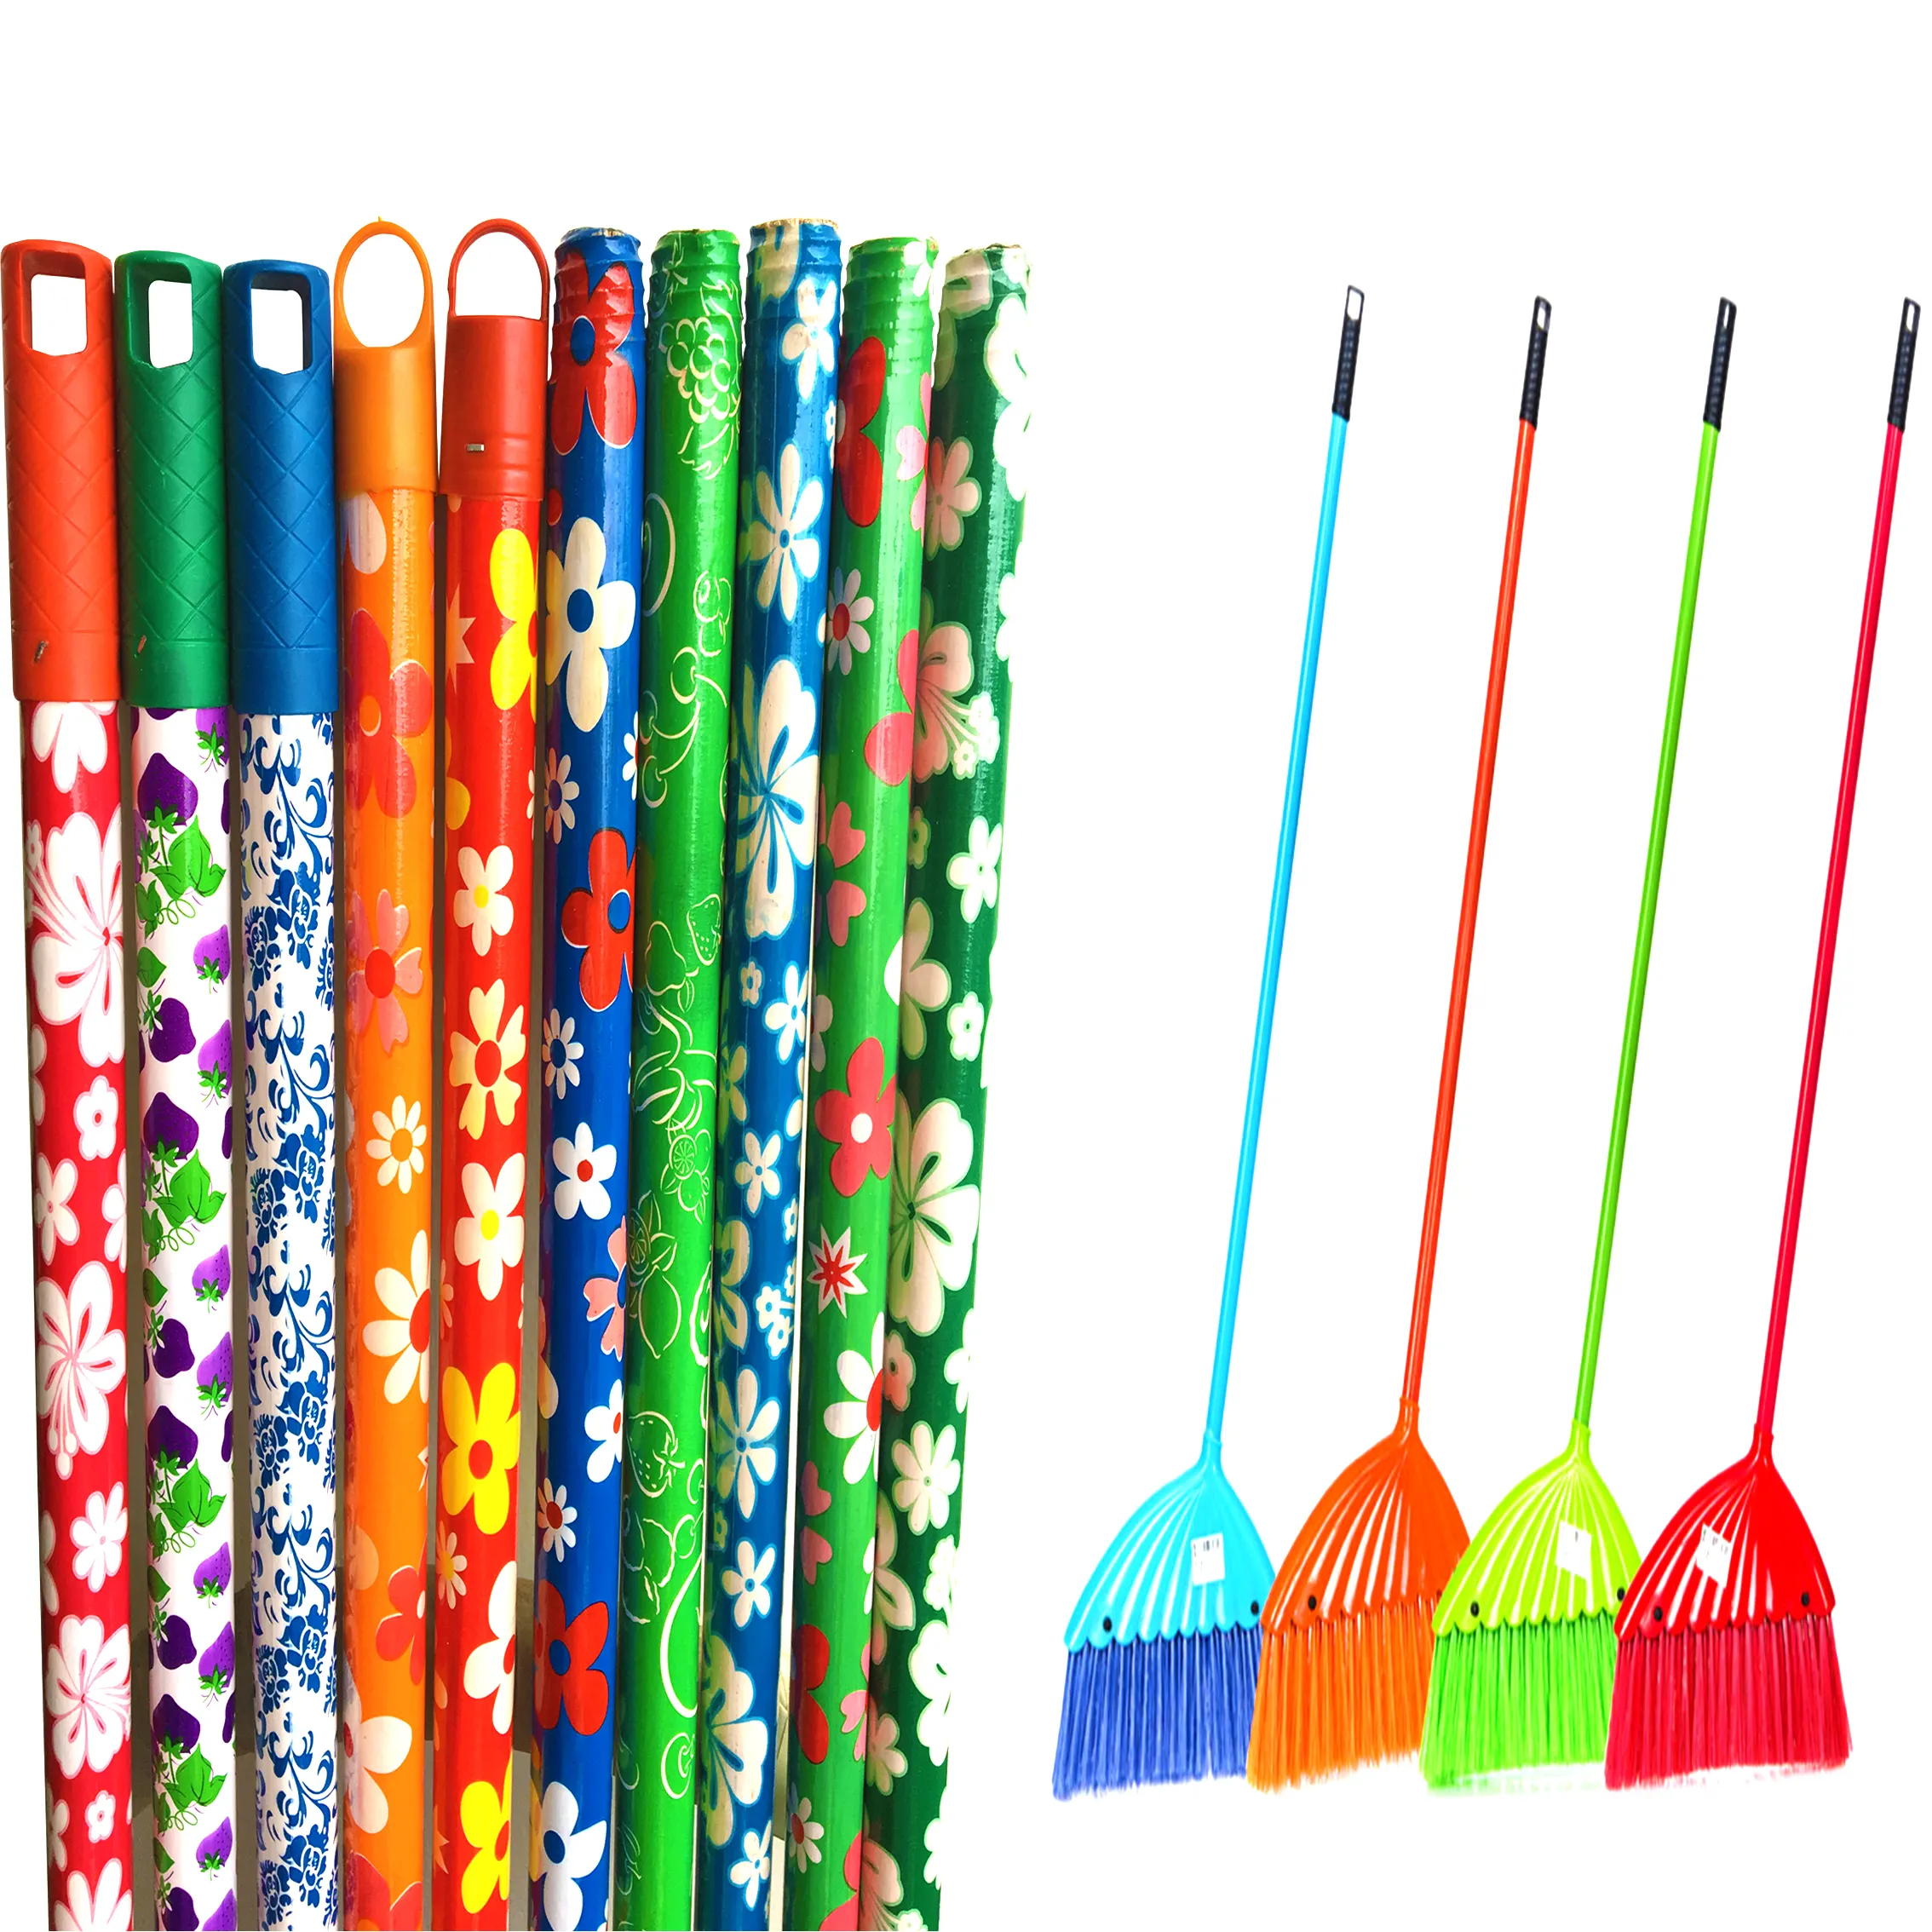 Manufacture factory supply made in china cleaning floor sticks with pvc coated wooden broom handle